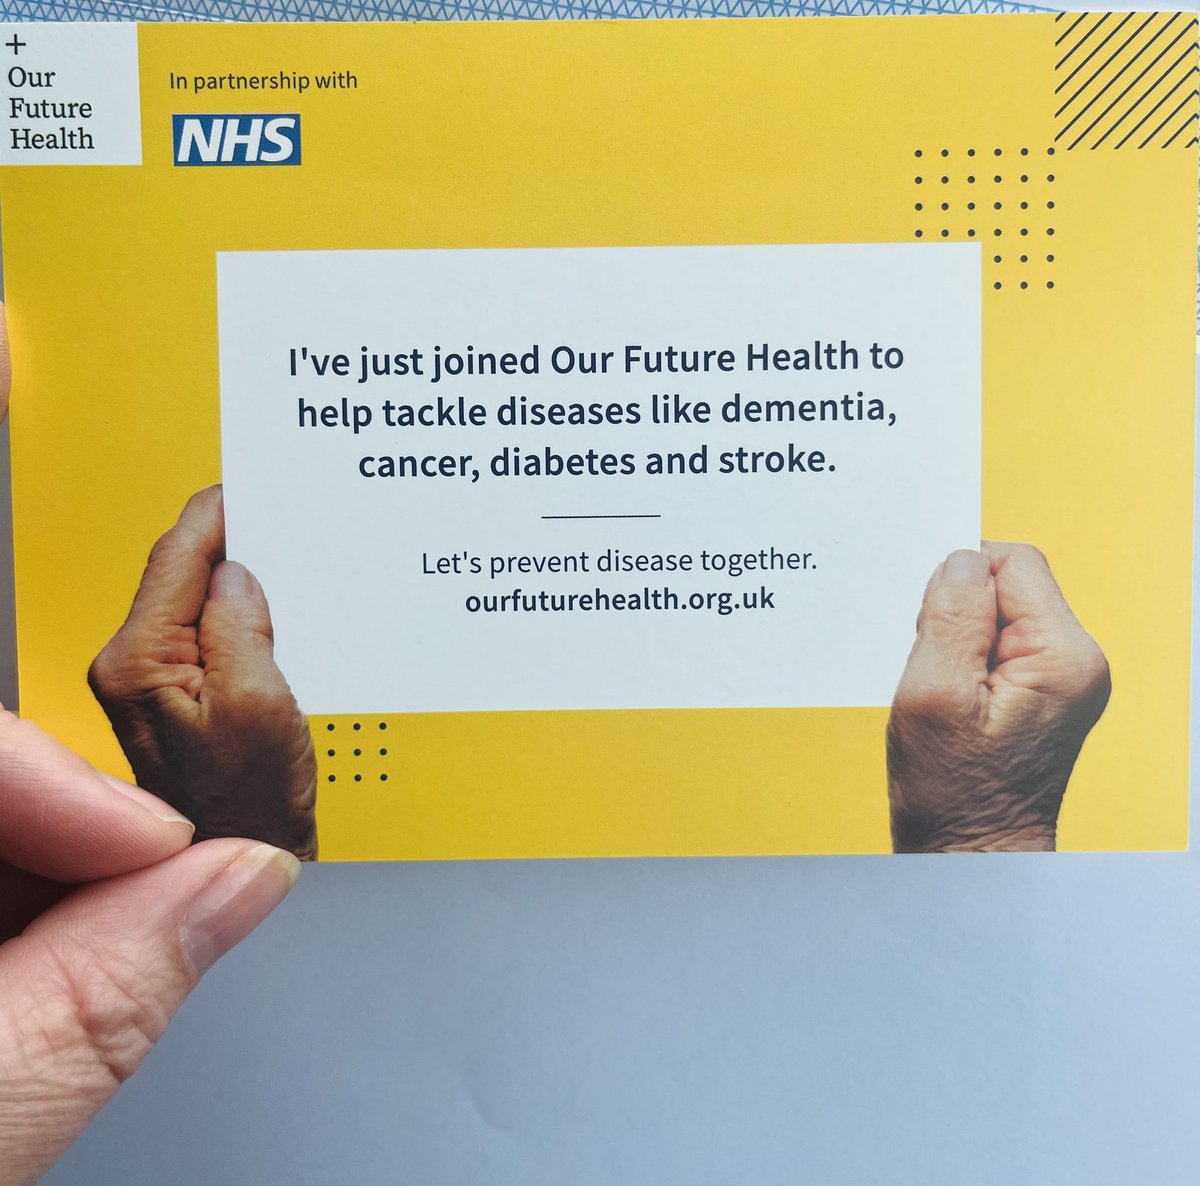 Just attended my appointment in Doncaster, what a great set up, quick and easy! Always feel like I’ve aced a test that I’ve not revised for when my blood pressure and cholesterol comes back healthy!
#ourfuturehealth #nhsDoncaster #Doncasterisgreat 
Had an invite? sign up